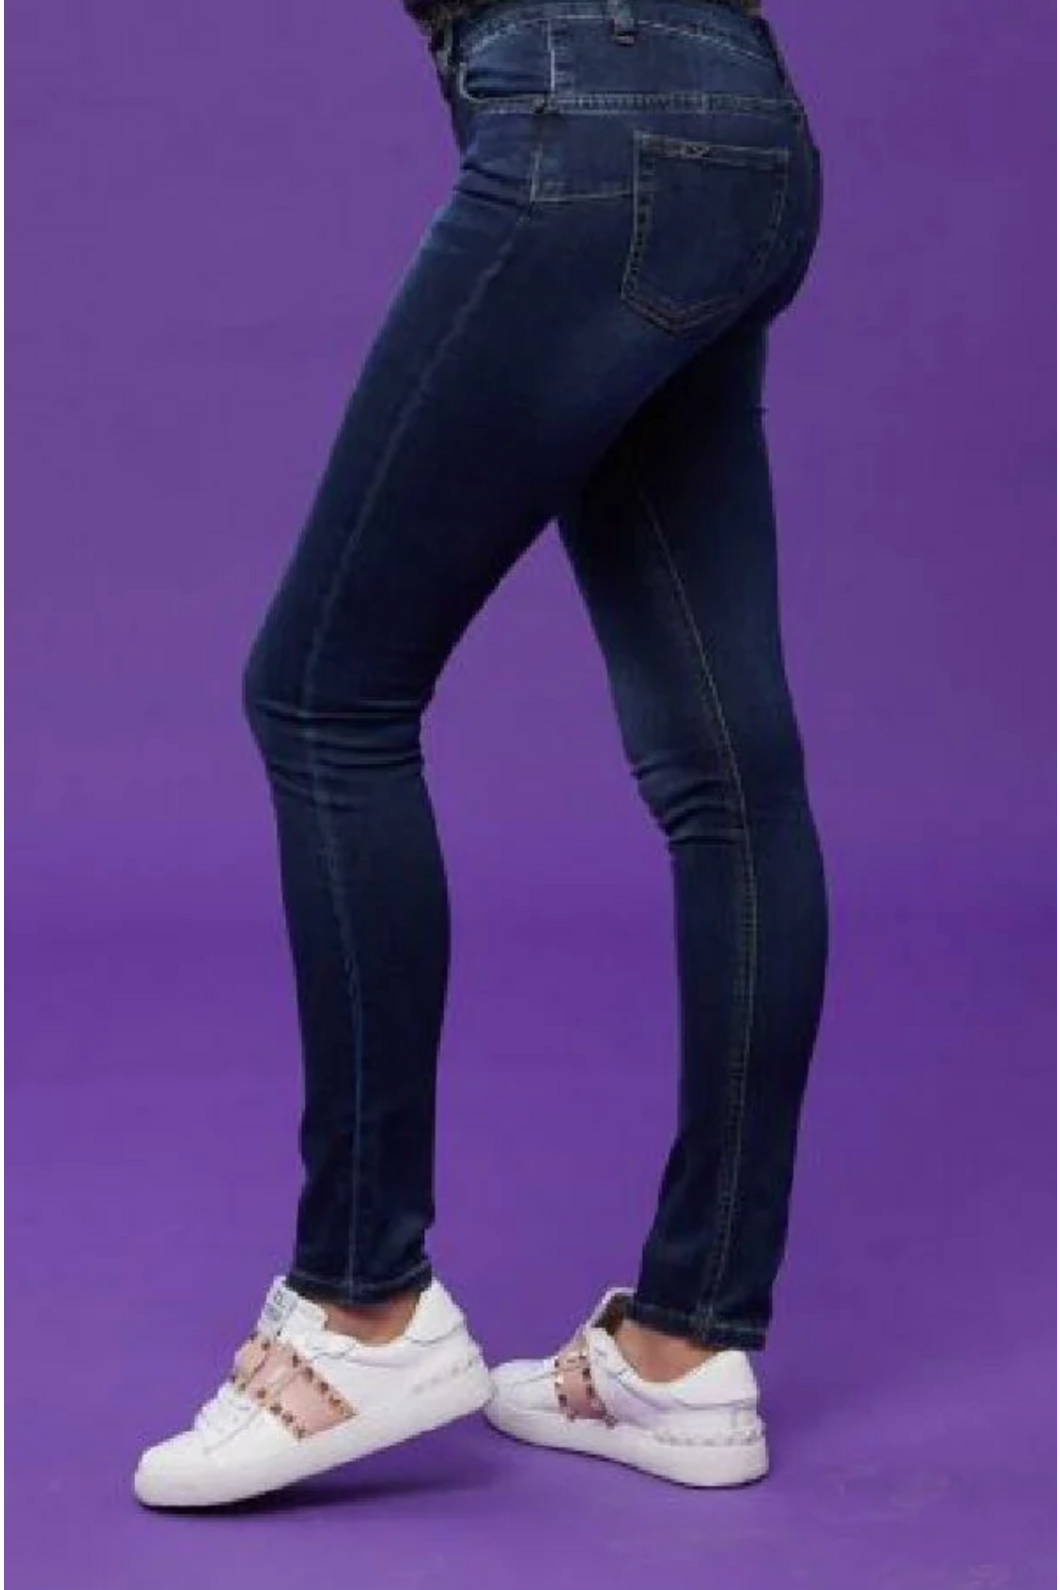 New London Jeans Up Lift Raunds Jean in Denim